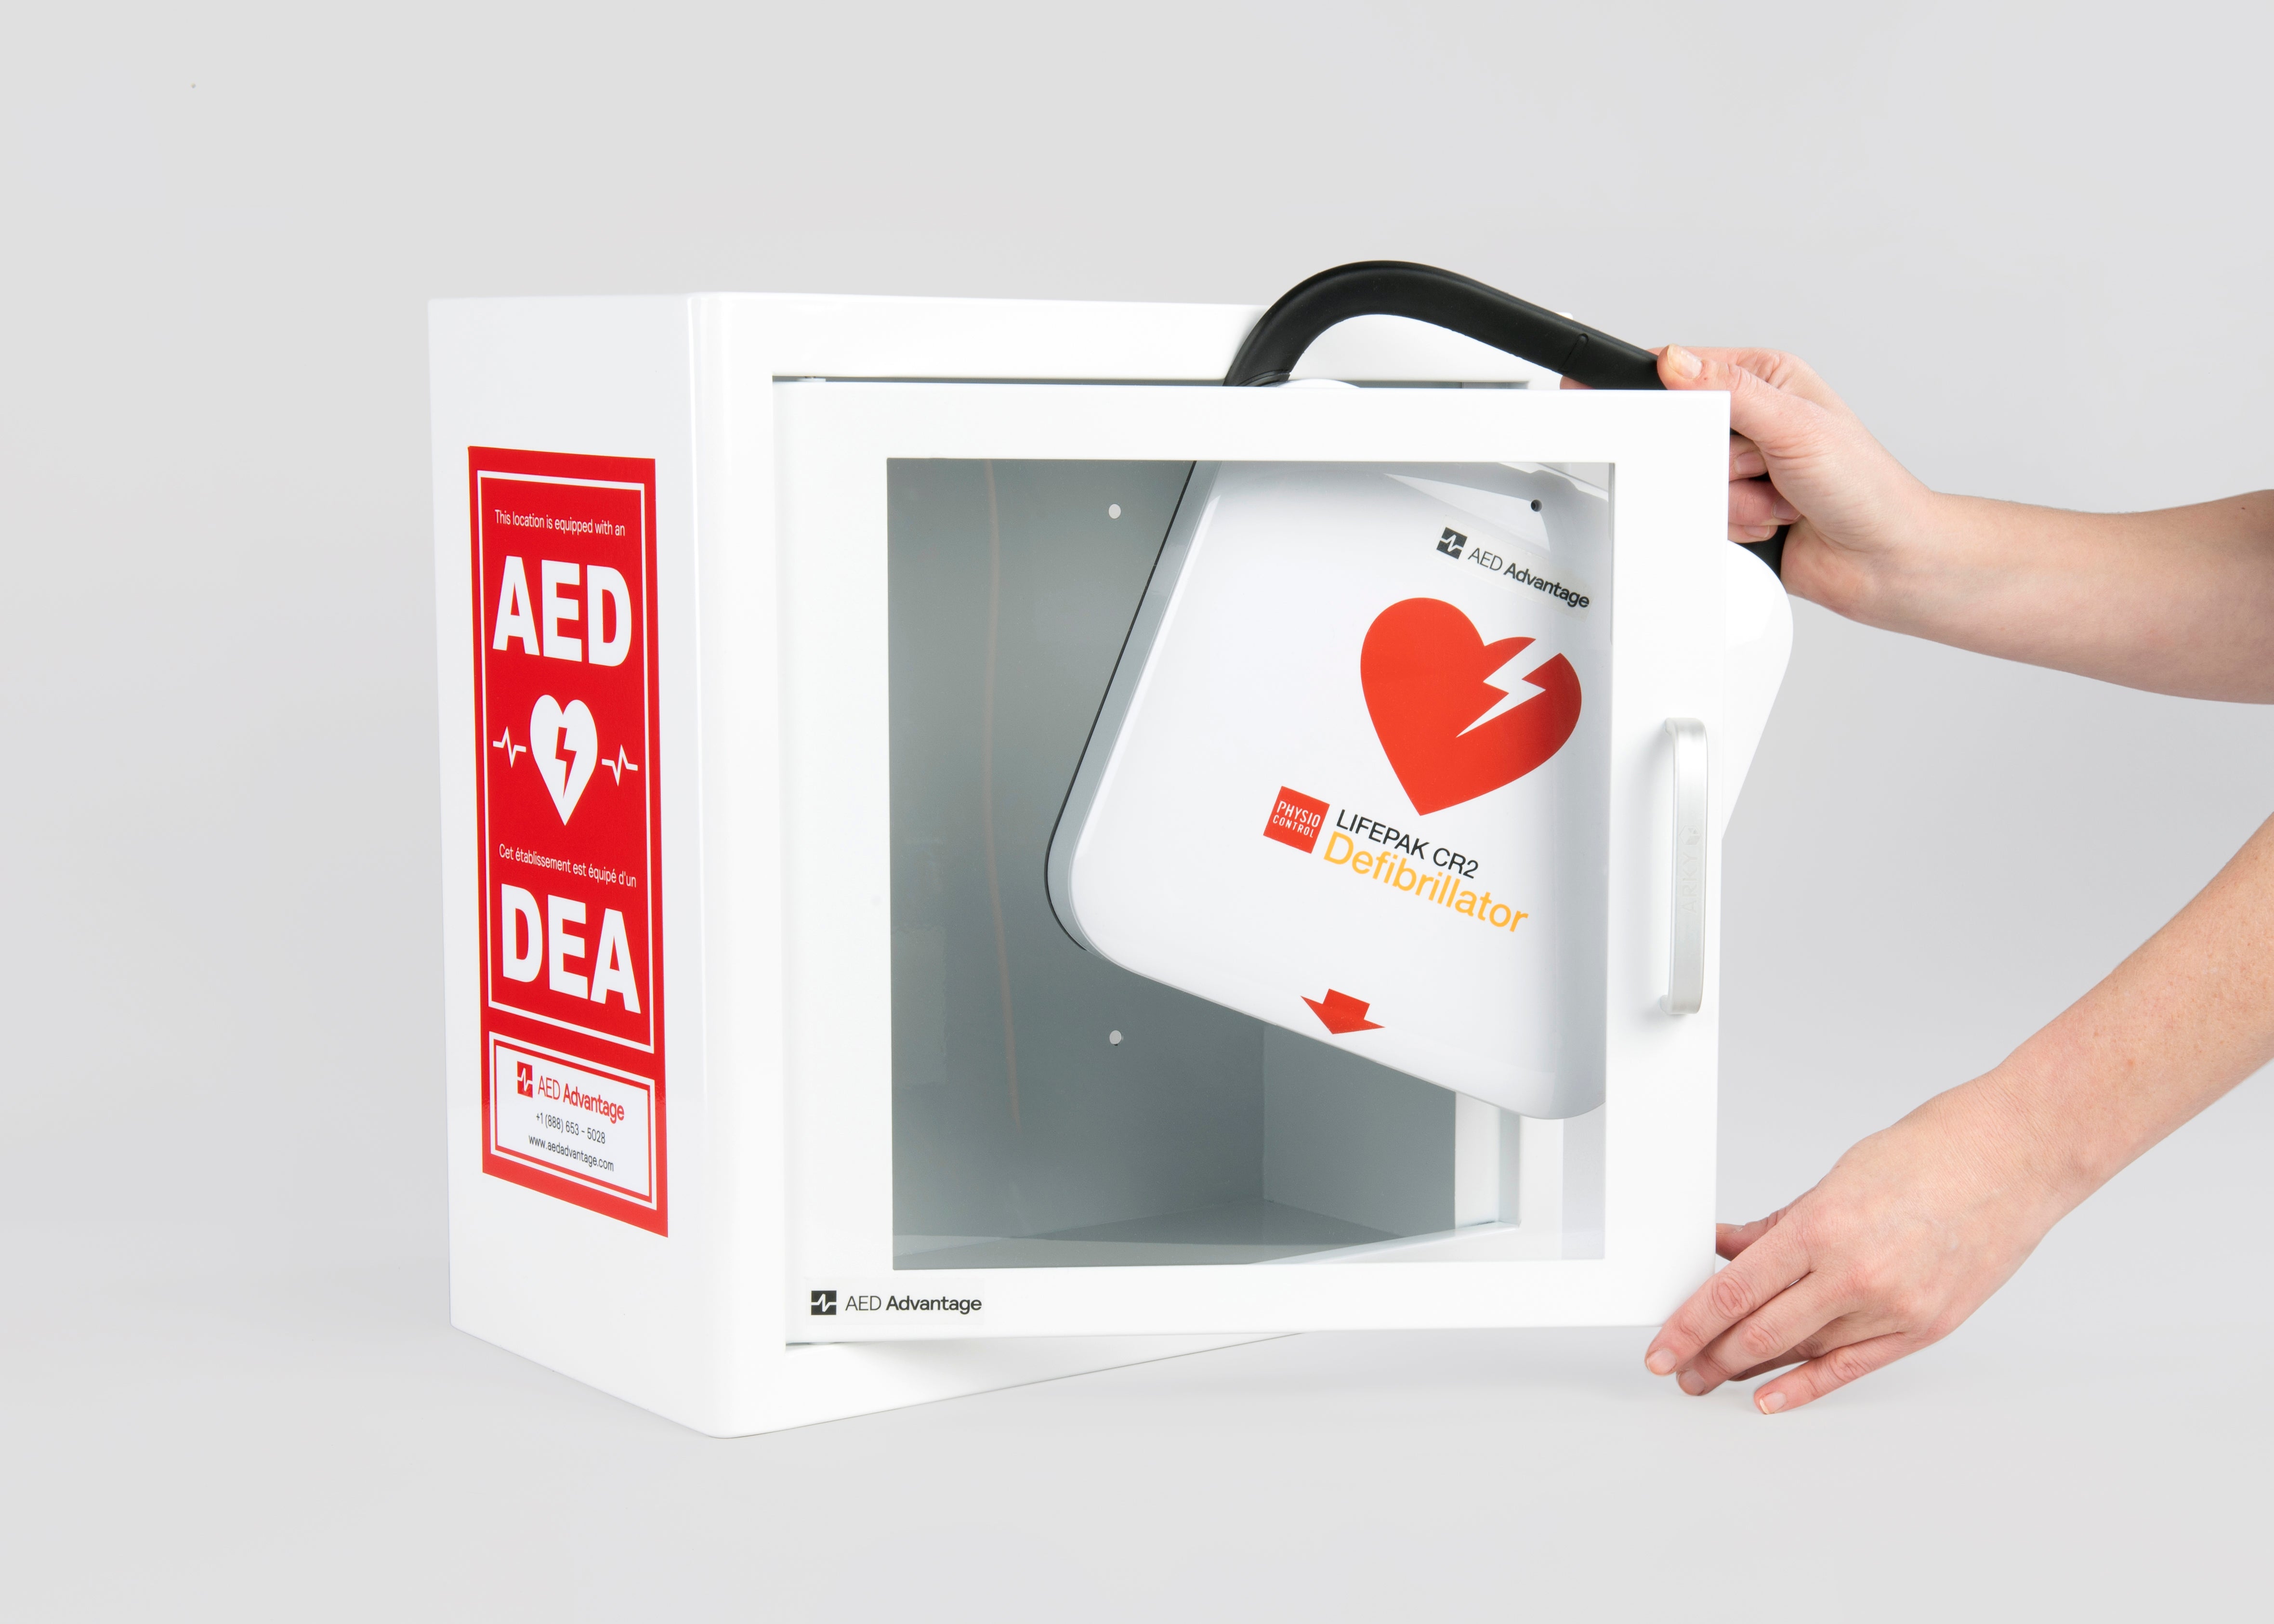 A white and red LIFEPAK CR2 AED machine being retrieved by hand from a white metal cabinet with red decals